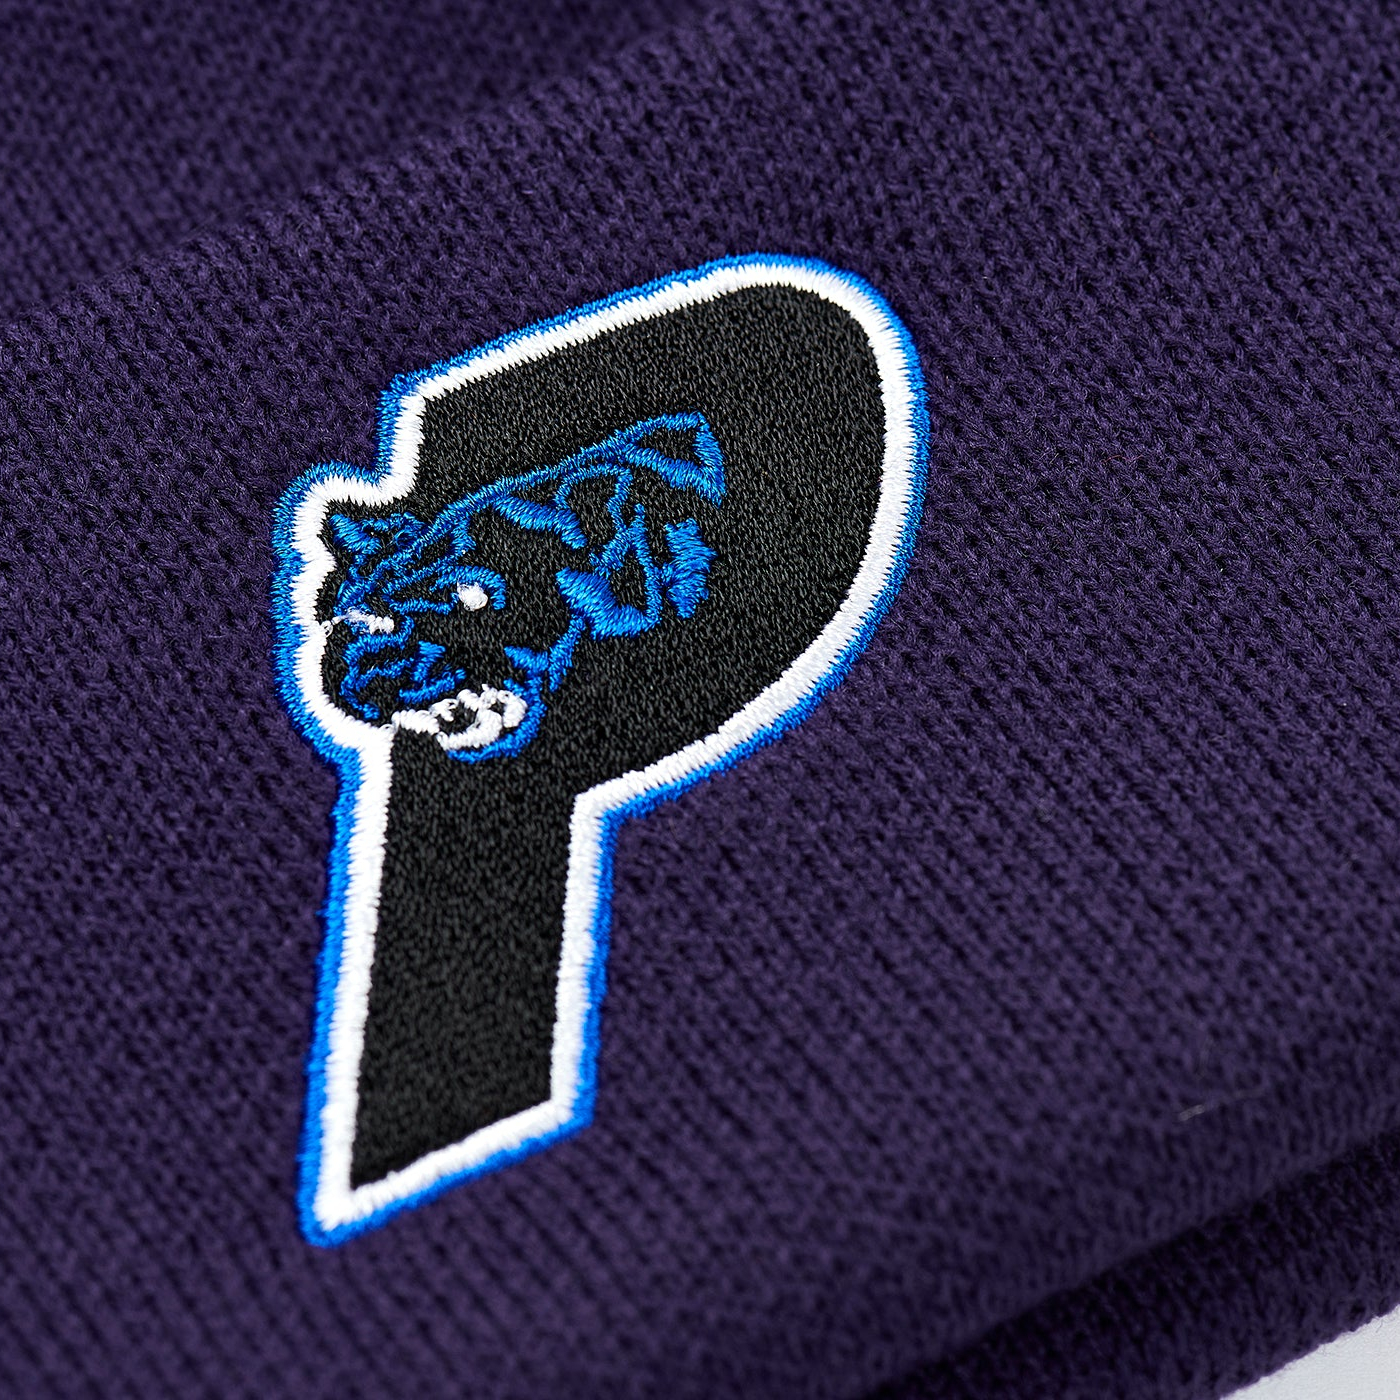 Thumbnail PANTHER BEANIE PERFECT PURPLE one color